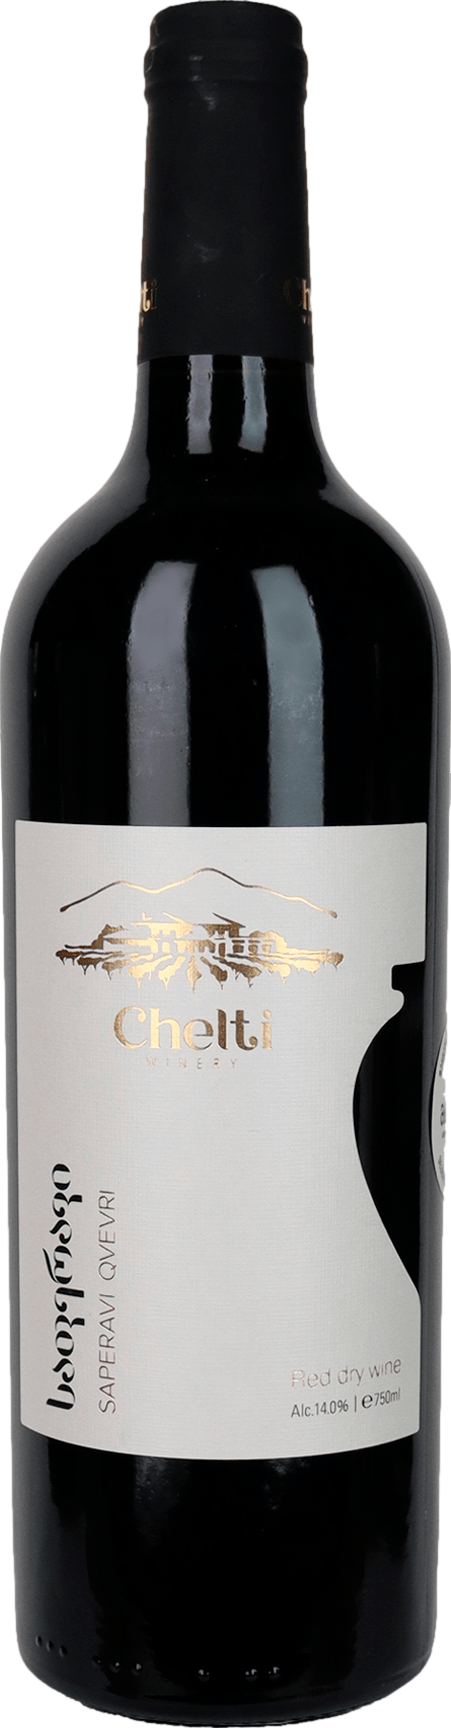 Product image of Chelti Saperavi Qvevri 2019 from 8wines